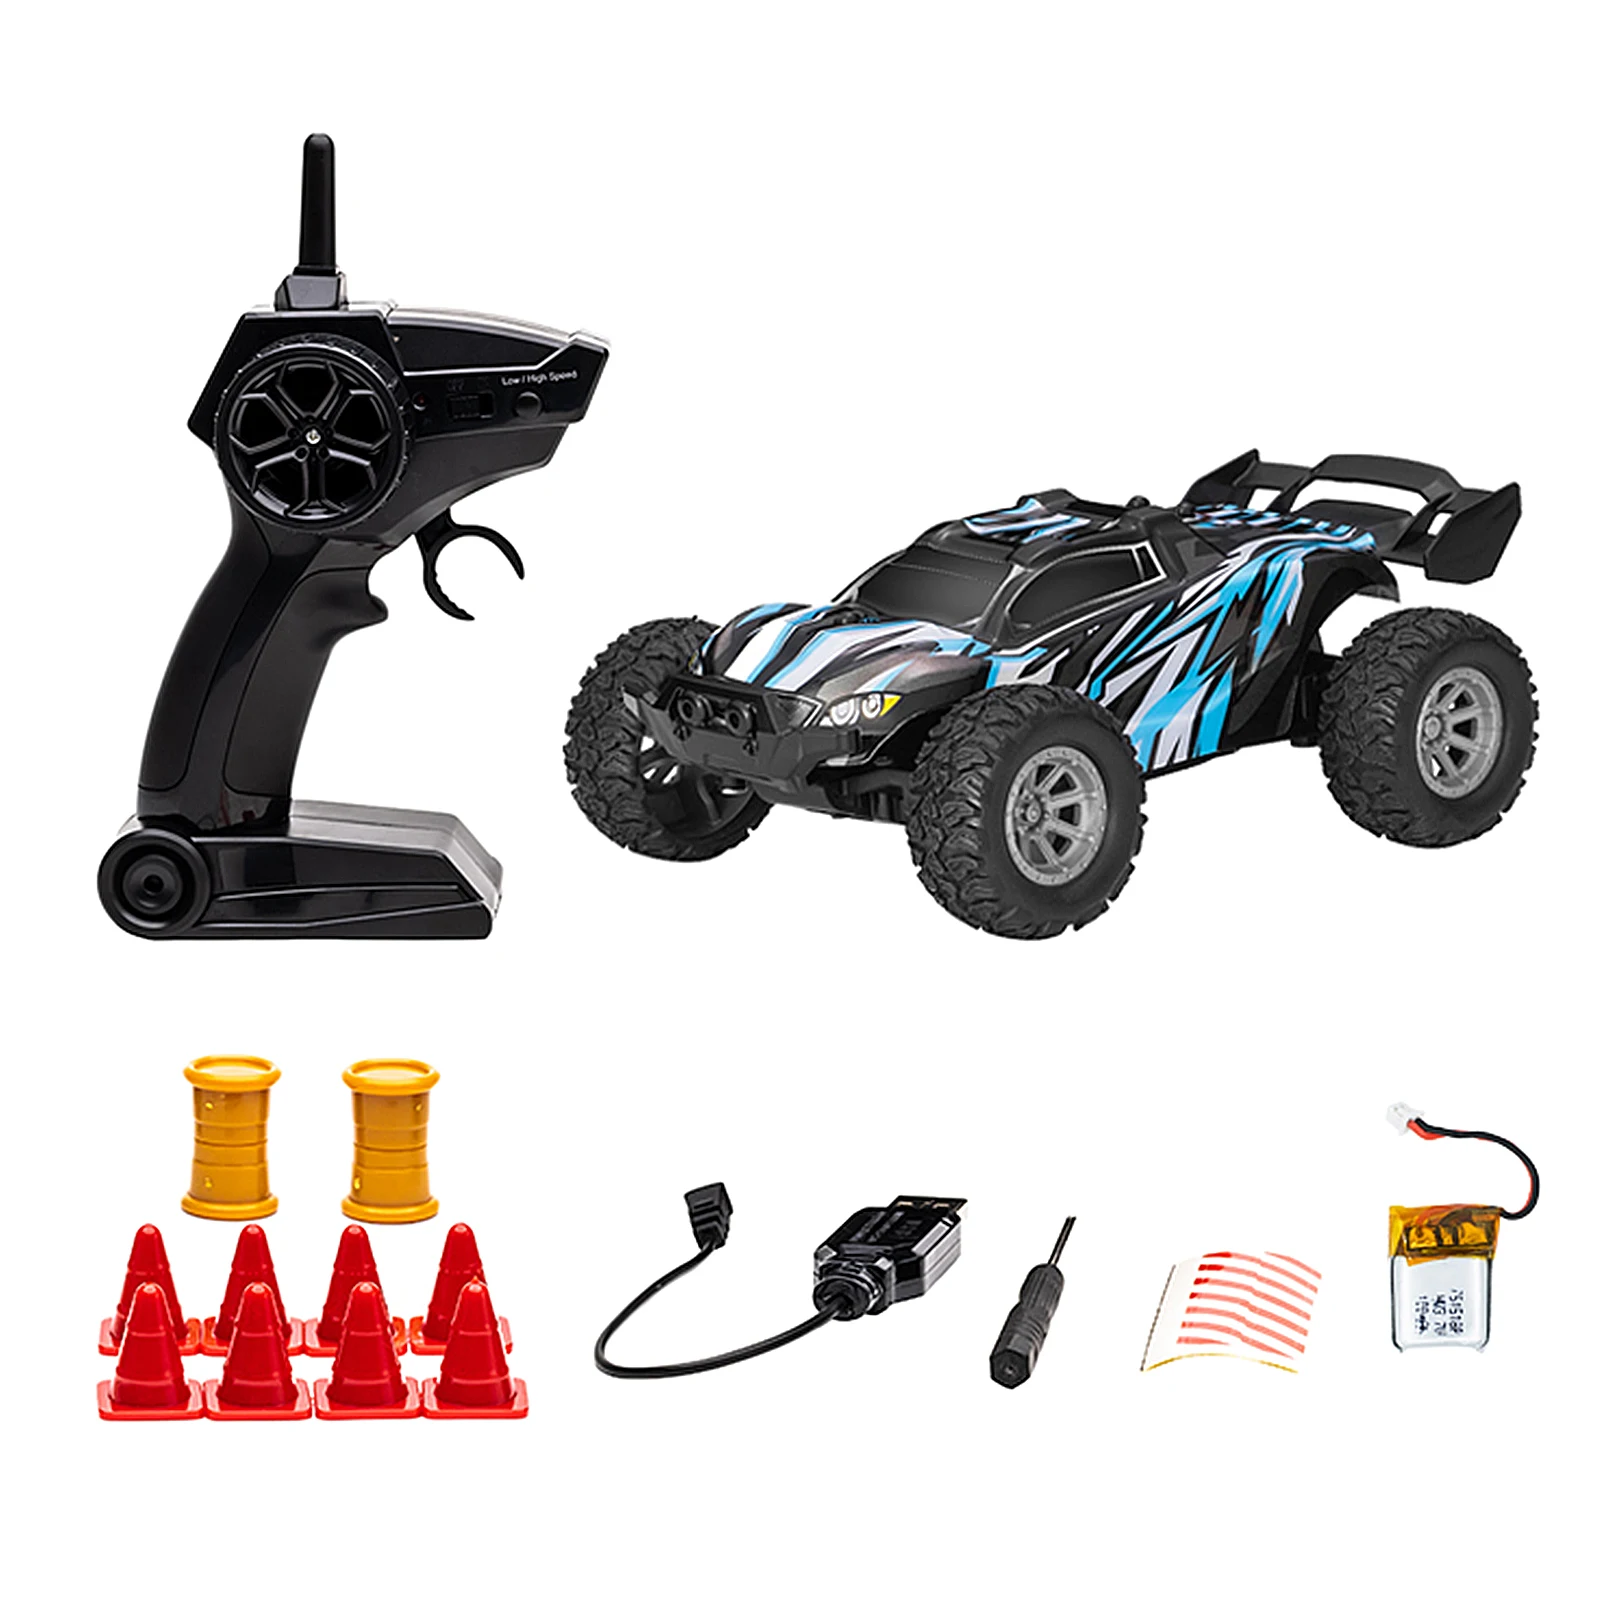 1pc S658 1/32 RC Car 2.4GHz 20km/h 2WD High Speed  Car Off-Road Truck